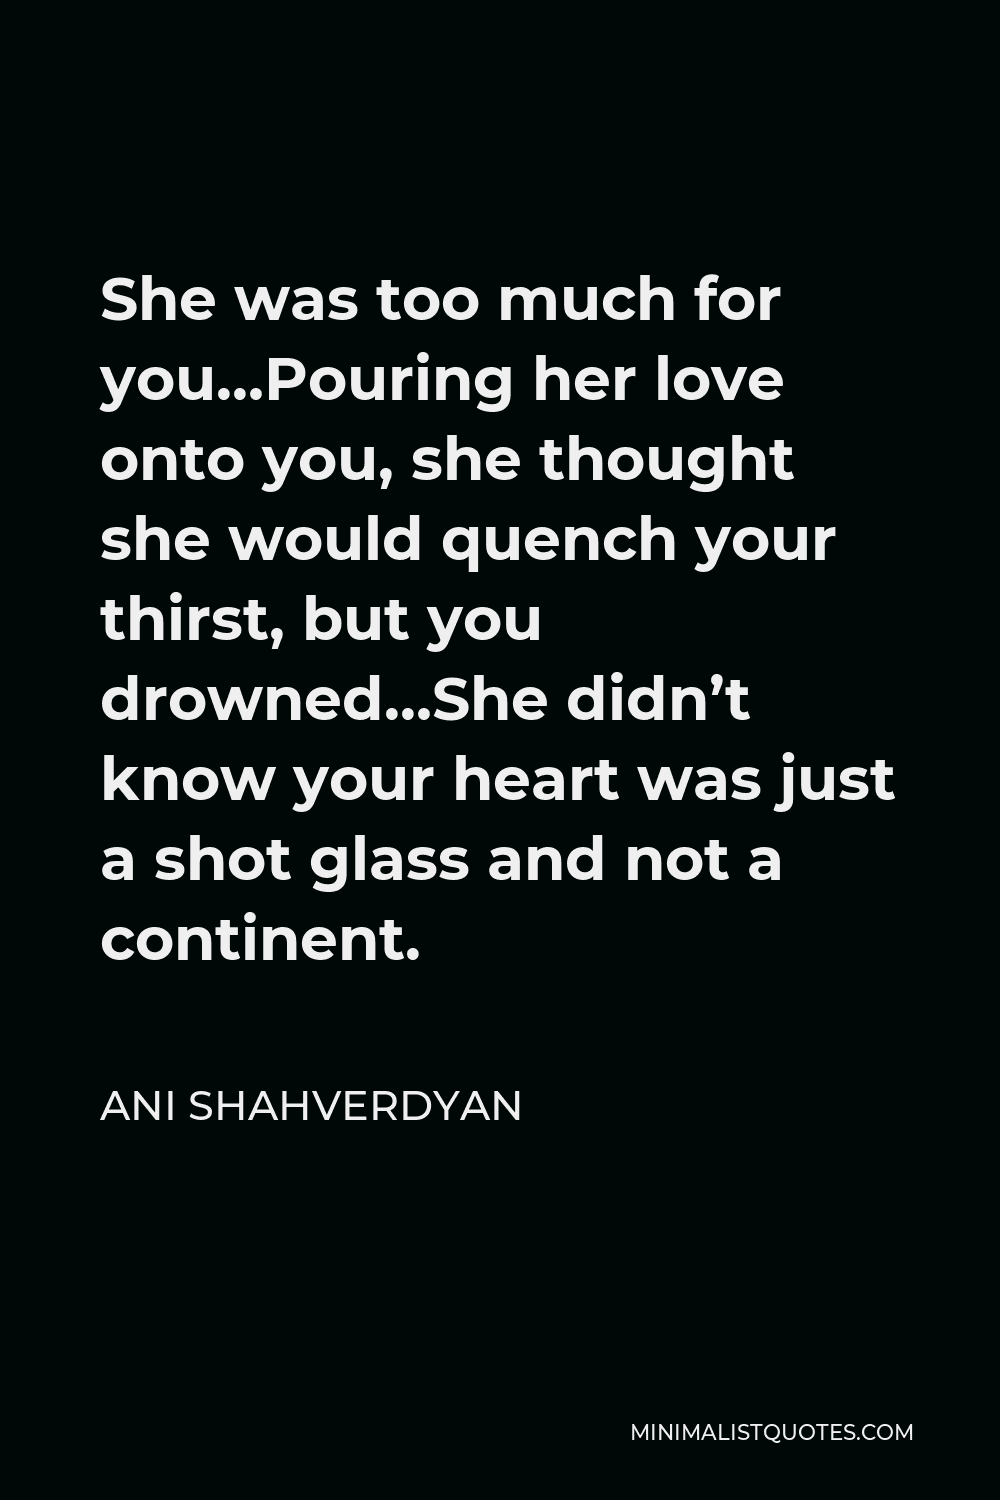 Ani Shahverdyan Quote - She was too much for you…Pouring her love onto you, she thought she would quench your thirst, but you drowned…She didn’t know your heart was just a shot glass and not a continent.